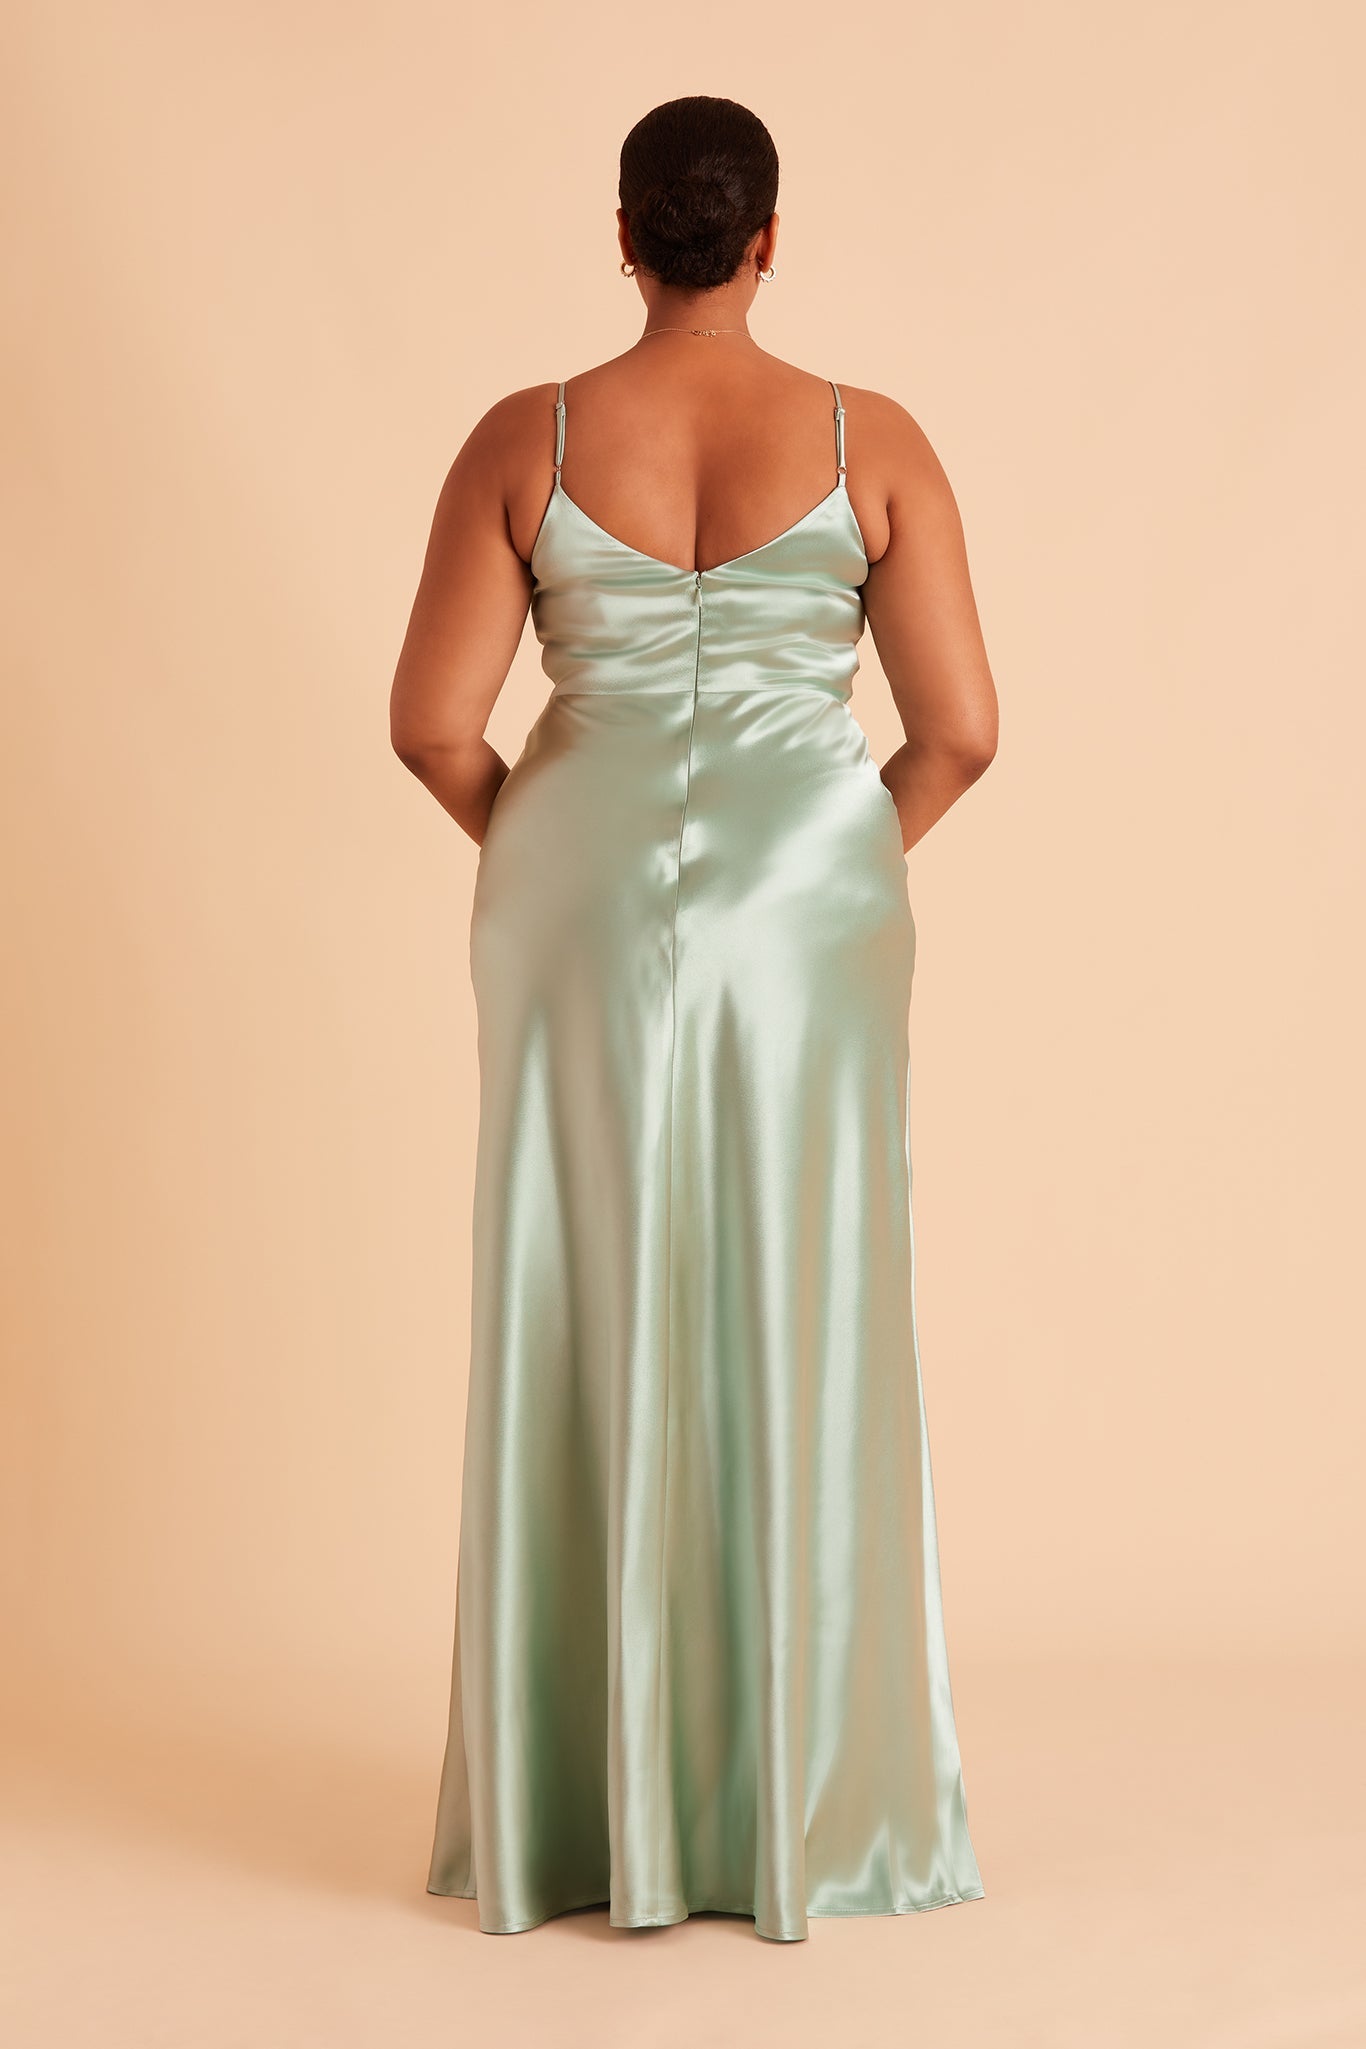 Jay plus size bridesmaid dress with slit in sage green satin by Birdy Grey, back view